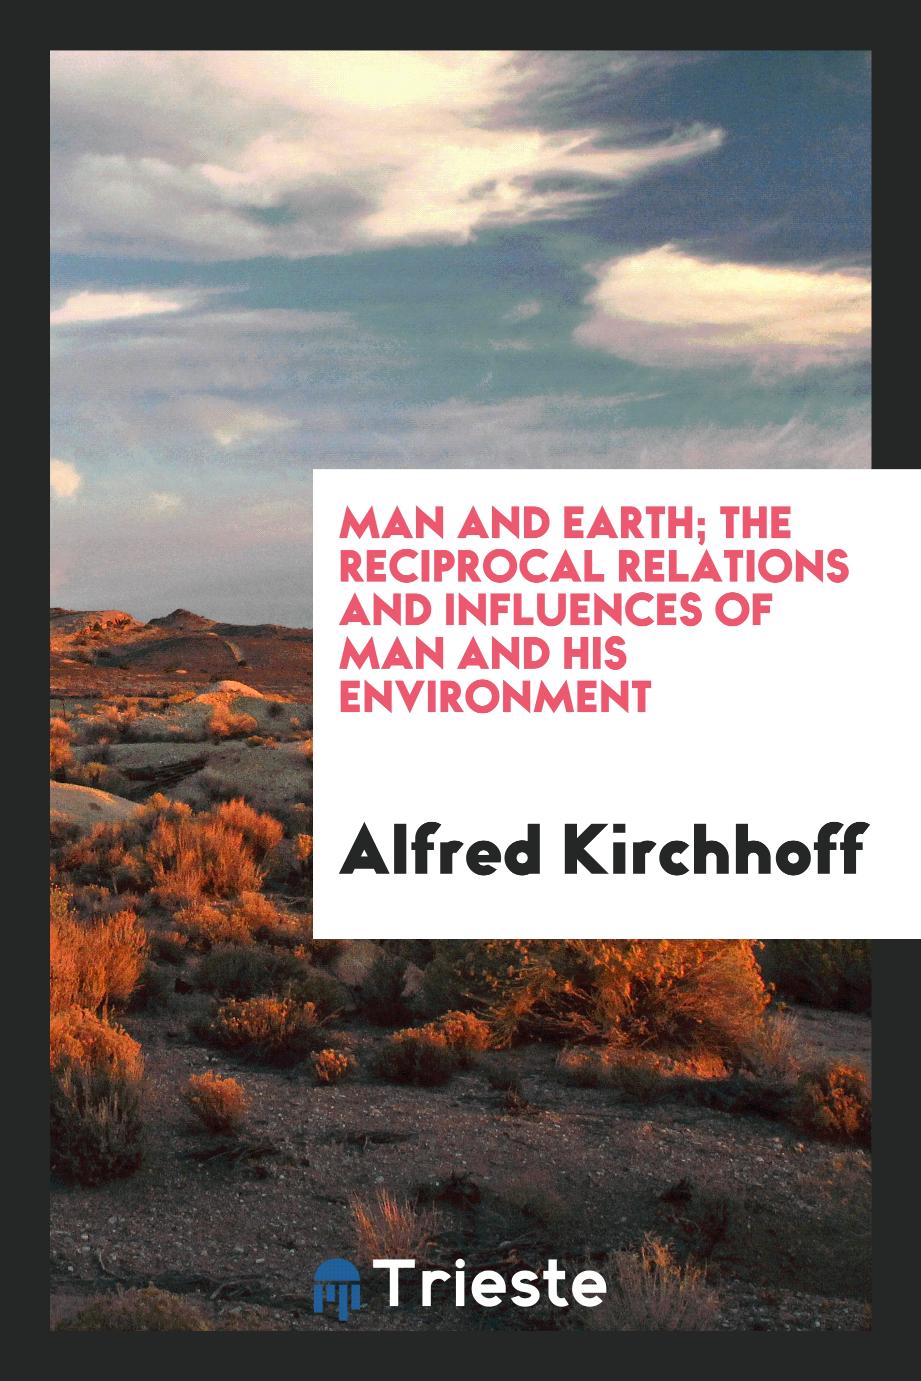 Man and earth; the reciprocal relations and influences of man and his environment